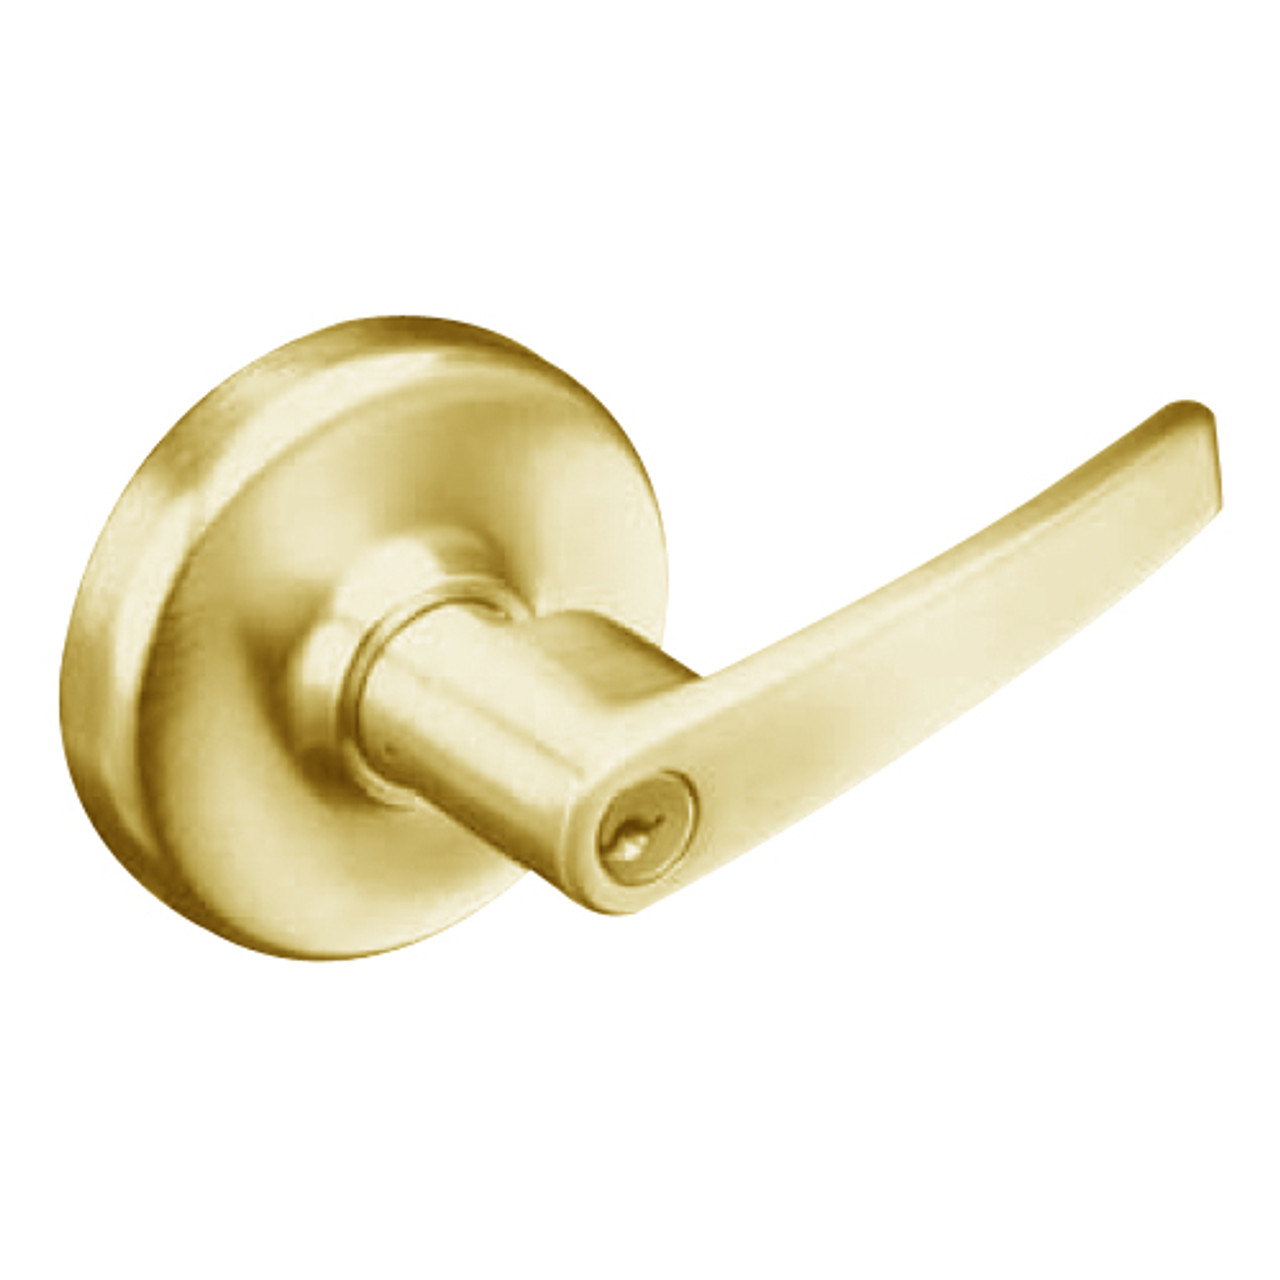 CL3151-AZD-605 Corbin CL3100 Series Vandal Resistant Entrance Cylindrical Locksets with Armstrong Lever in Bright Brass Finish